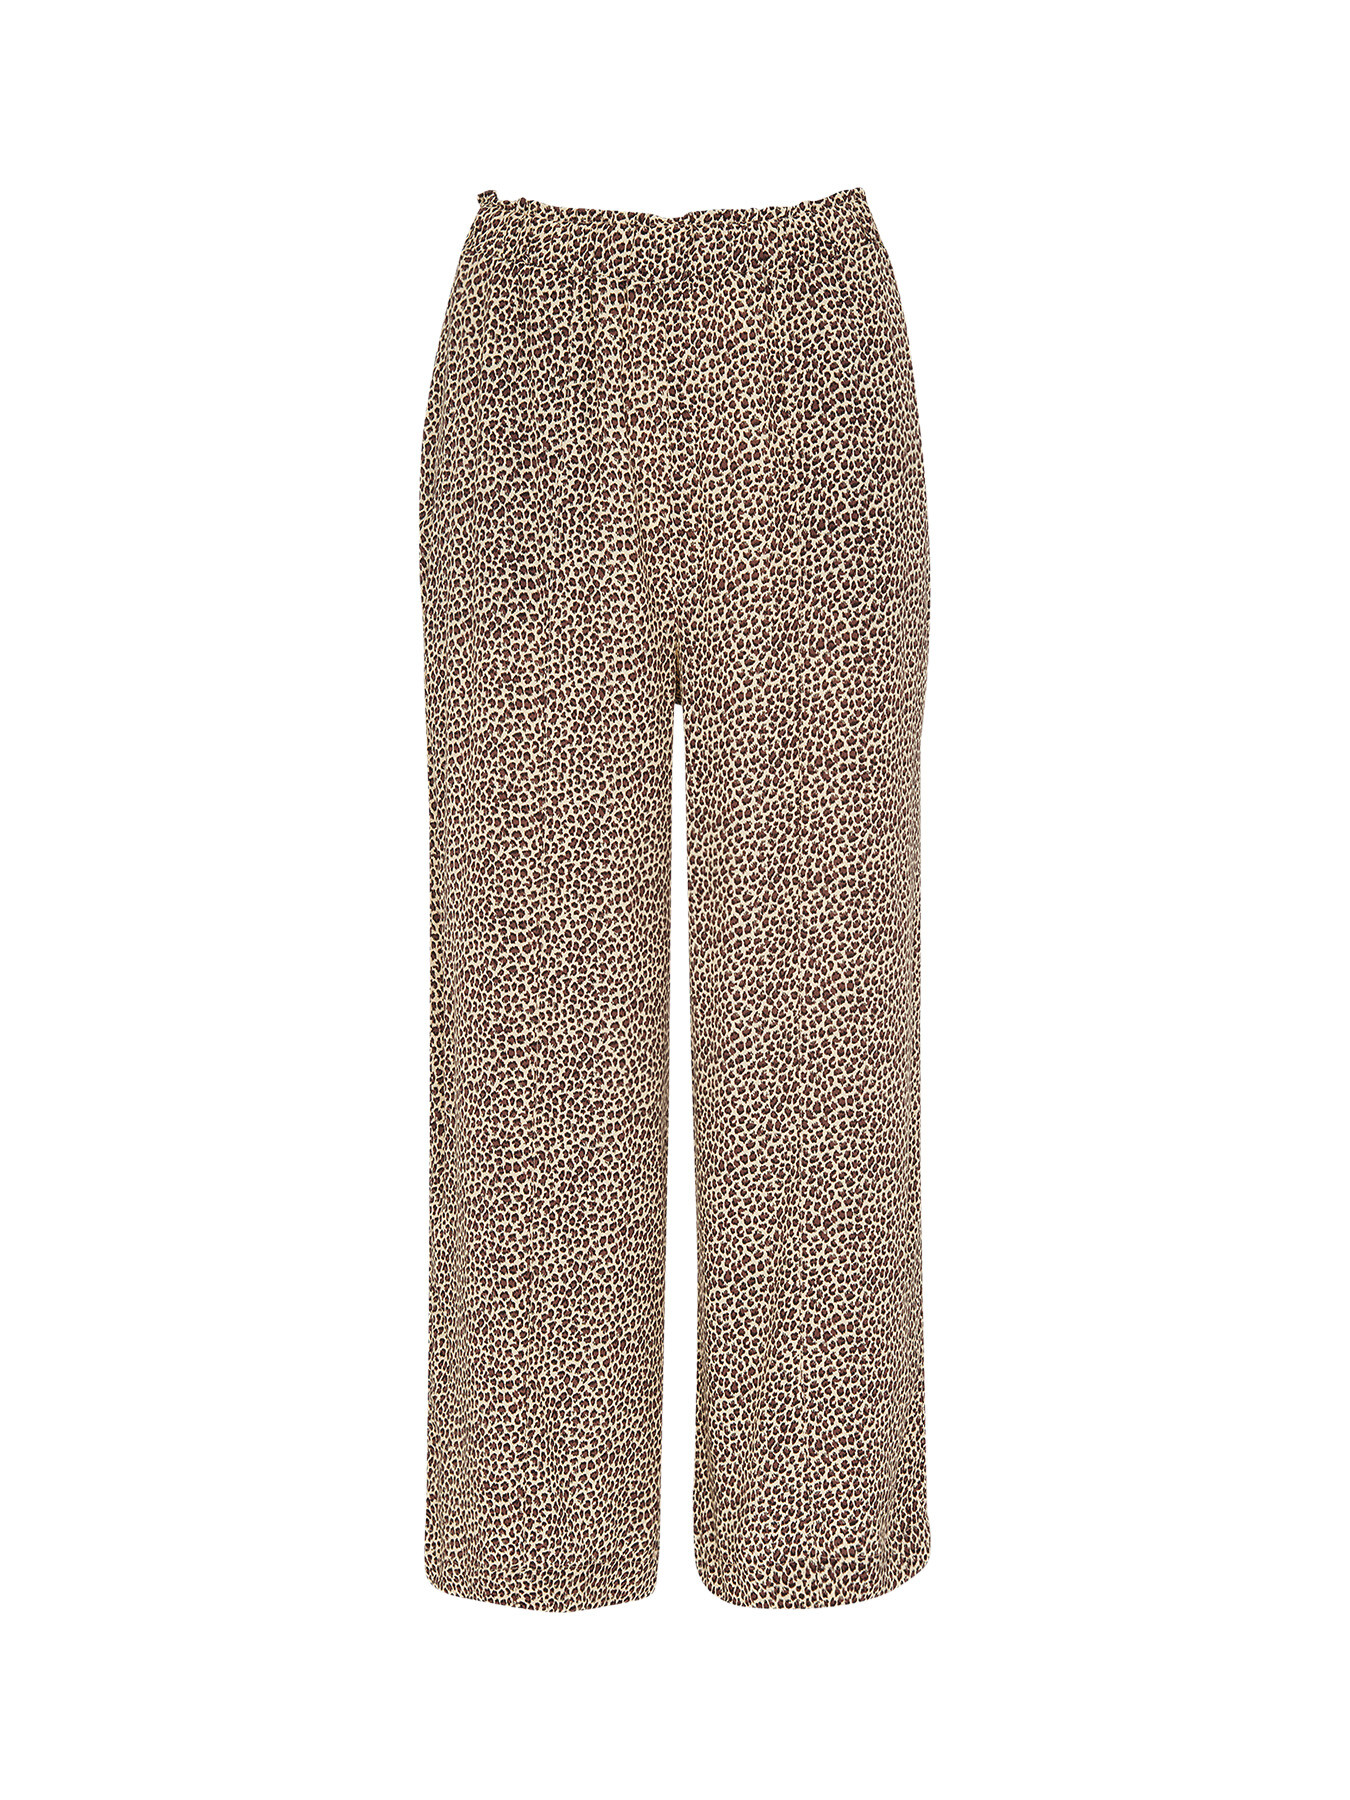 Women's Whistles Dashed Leopard Print Trouser